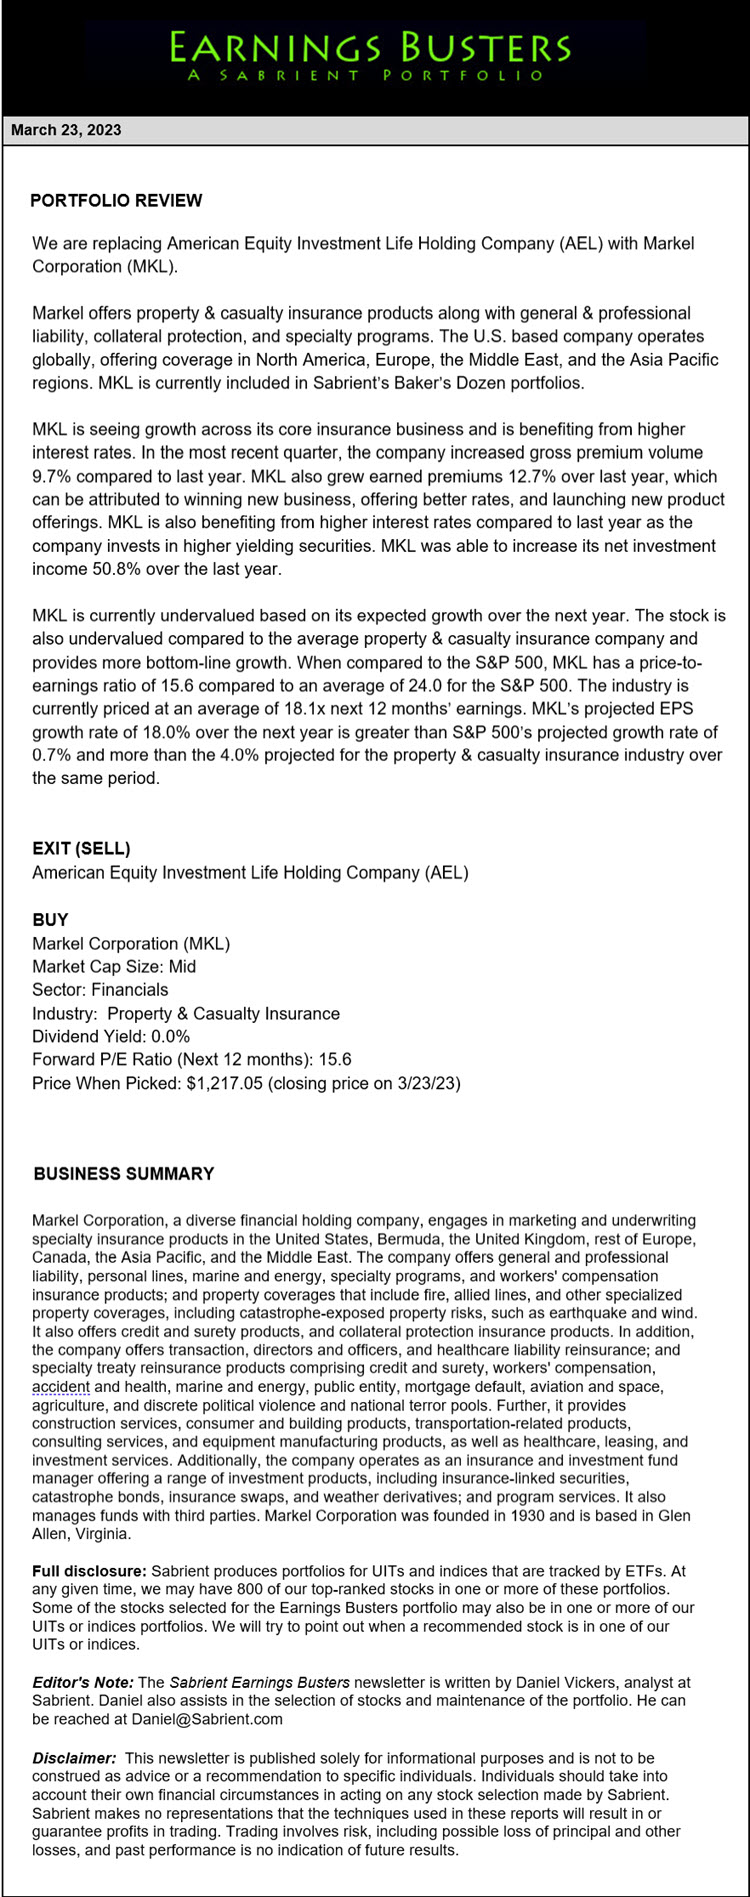 Earnings Busters Newsletter - March 23, 2023